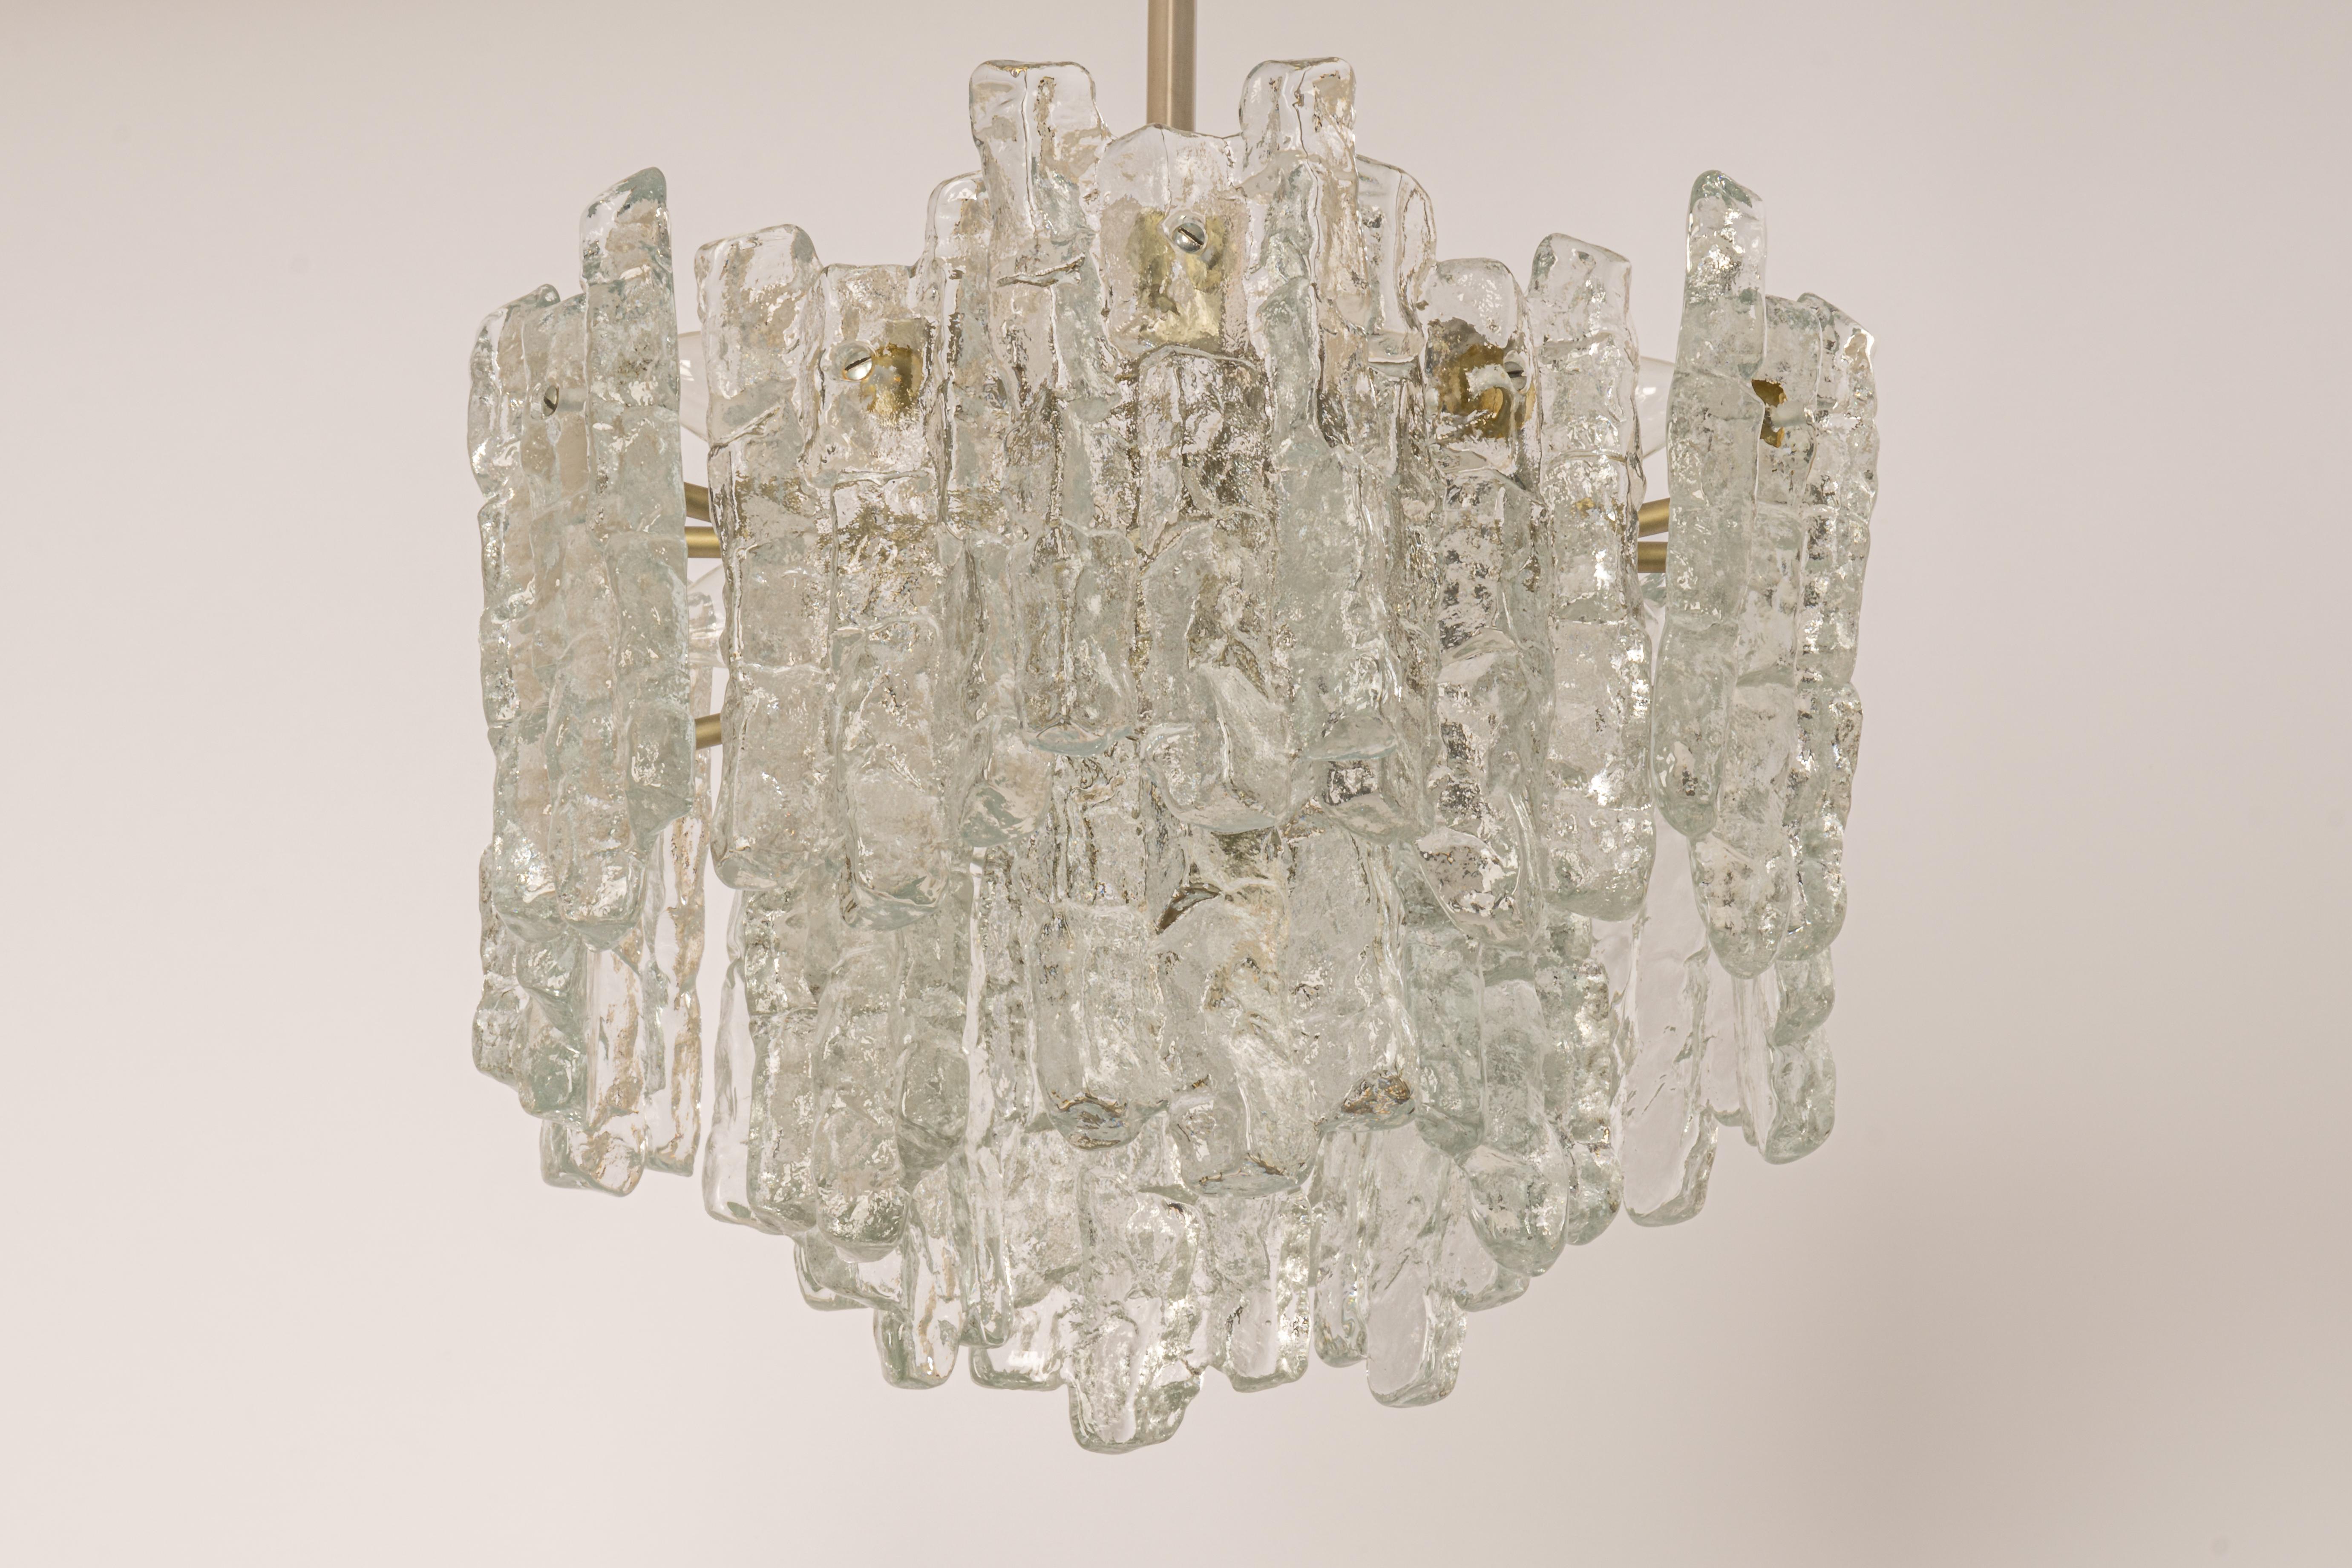 1 of 5 Large Murano Ice Glass Chandelier by Kalmar, Austria, 1960s For Sale 3